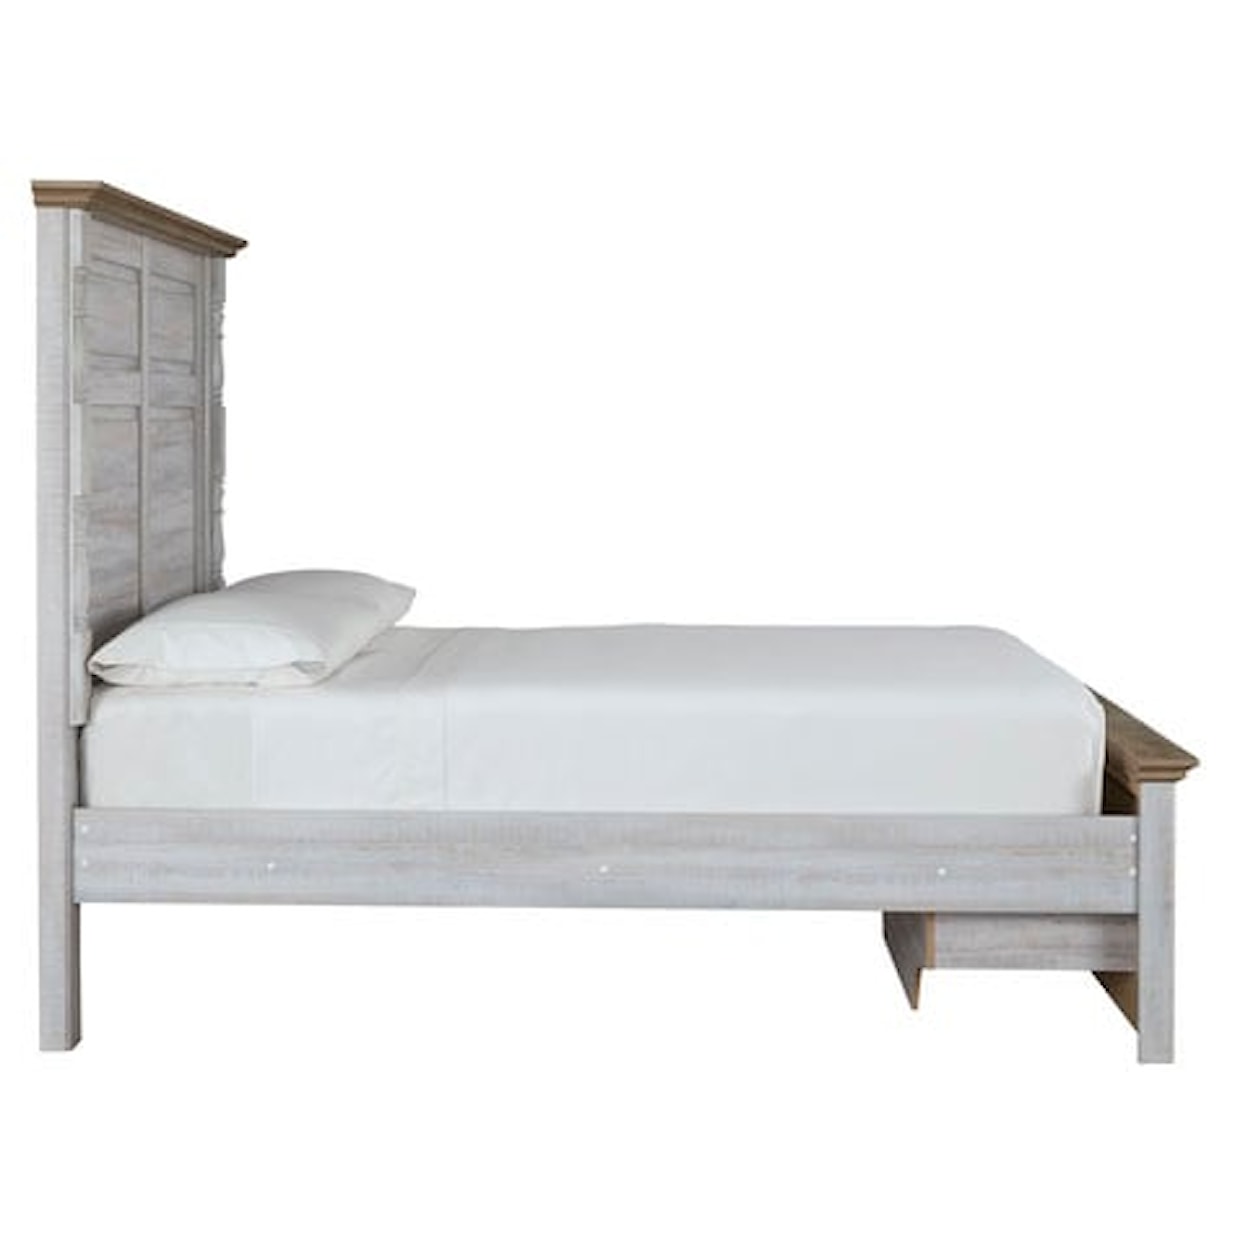 Signature Design by Ashley Haven Bay Queen Panel Storage Bed